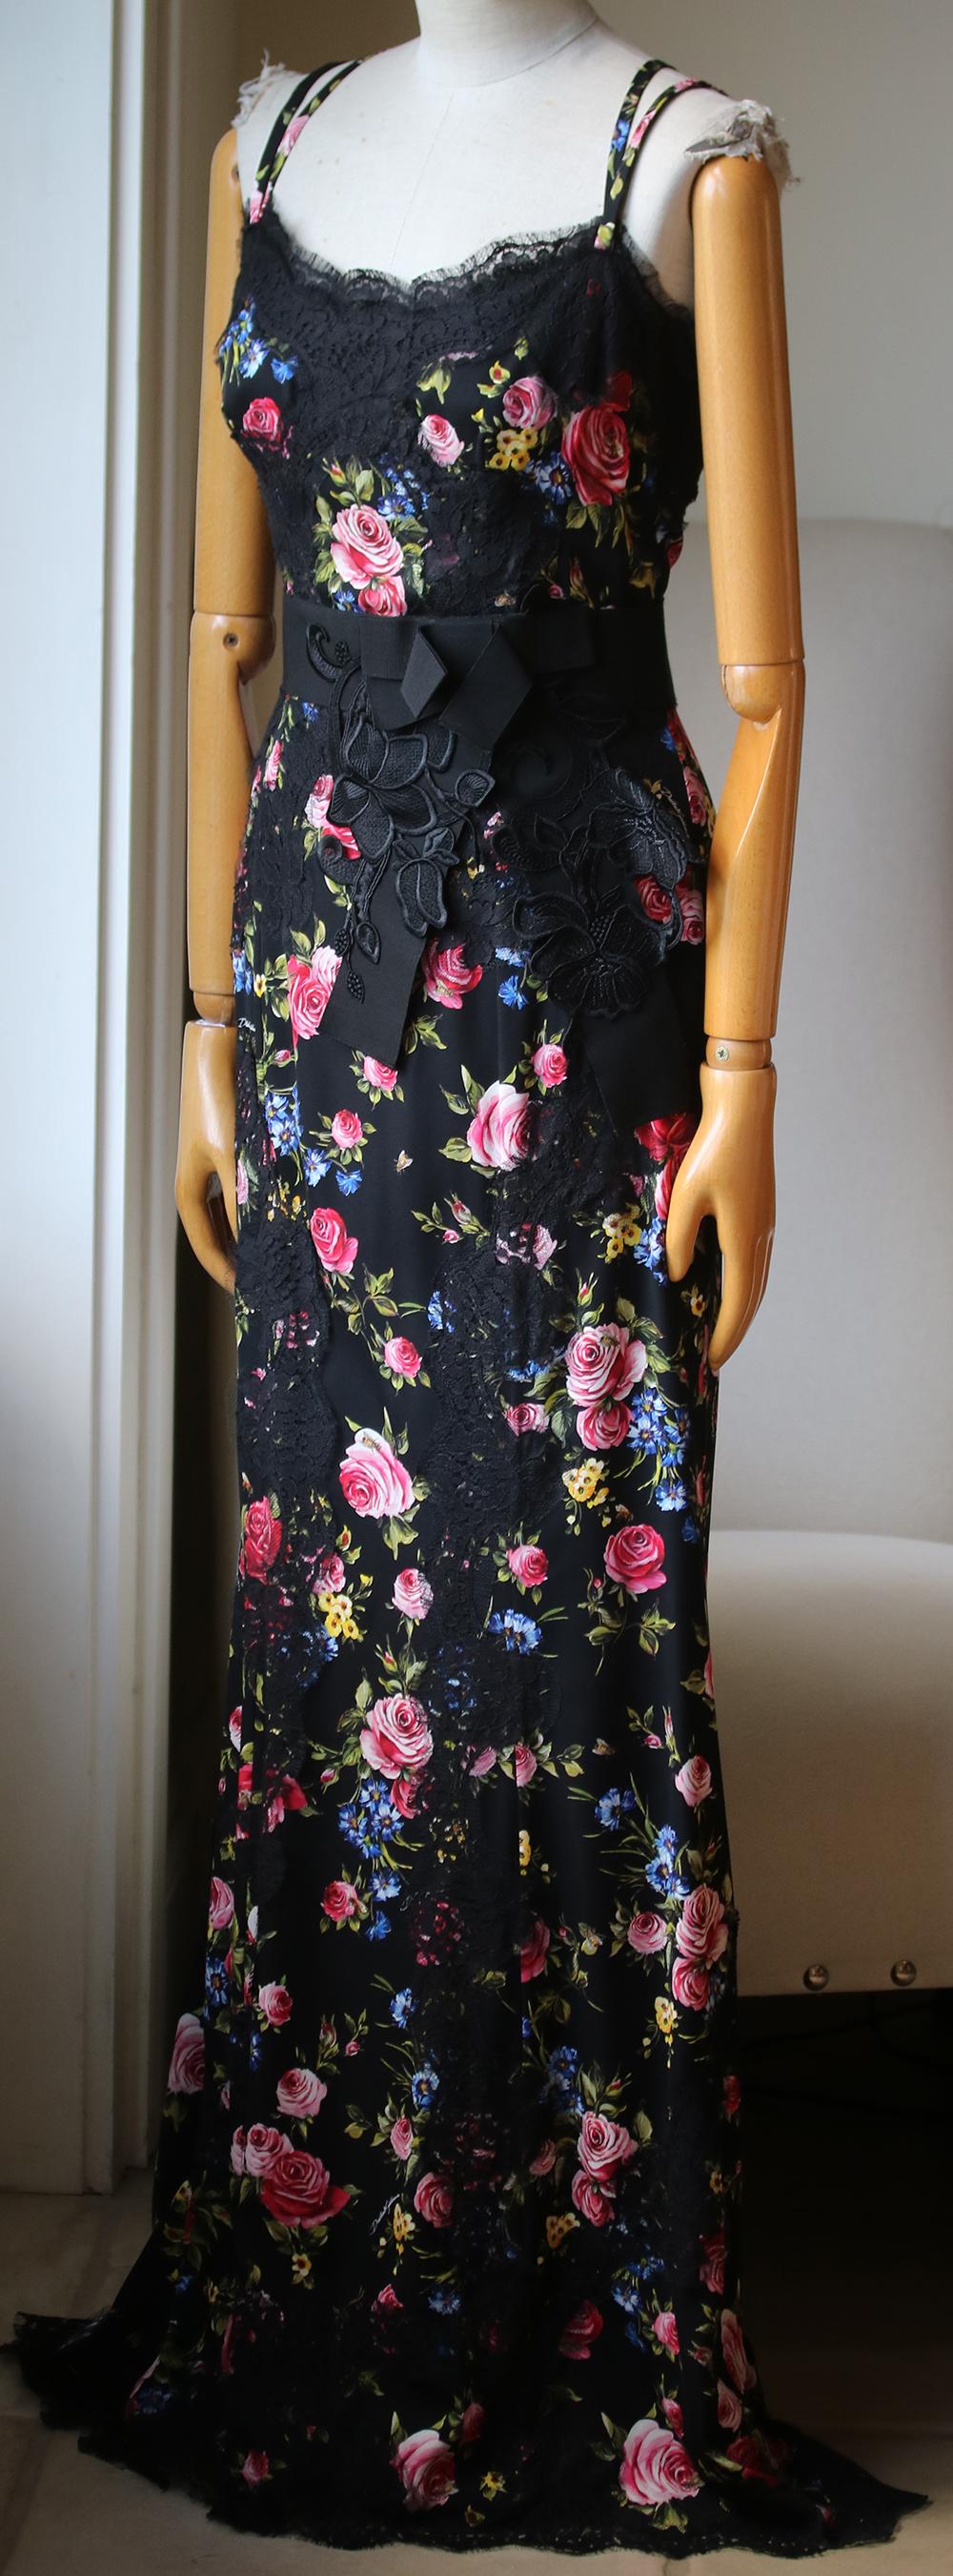 Gown. Maxi length. Satin-crepe. Silk and cotton-blend. Bow-embellished. Lace trim. Floral print. Sleeveless. Waist belt. Hook and zip fastening at back. Fully lined. Flared hem. Lightweight fabric. Made in Italy. 67% Silk, 24% Cotton, 6% Polyamide,